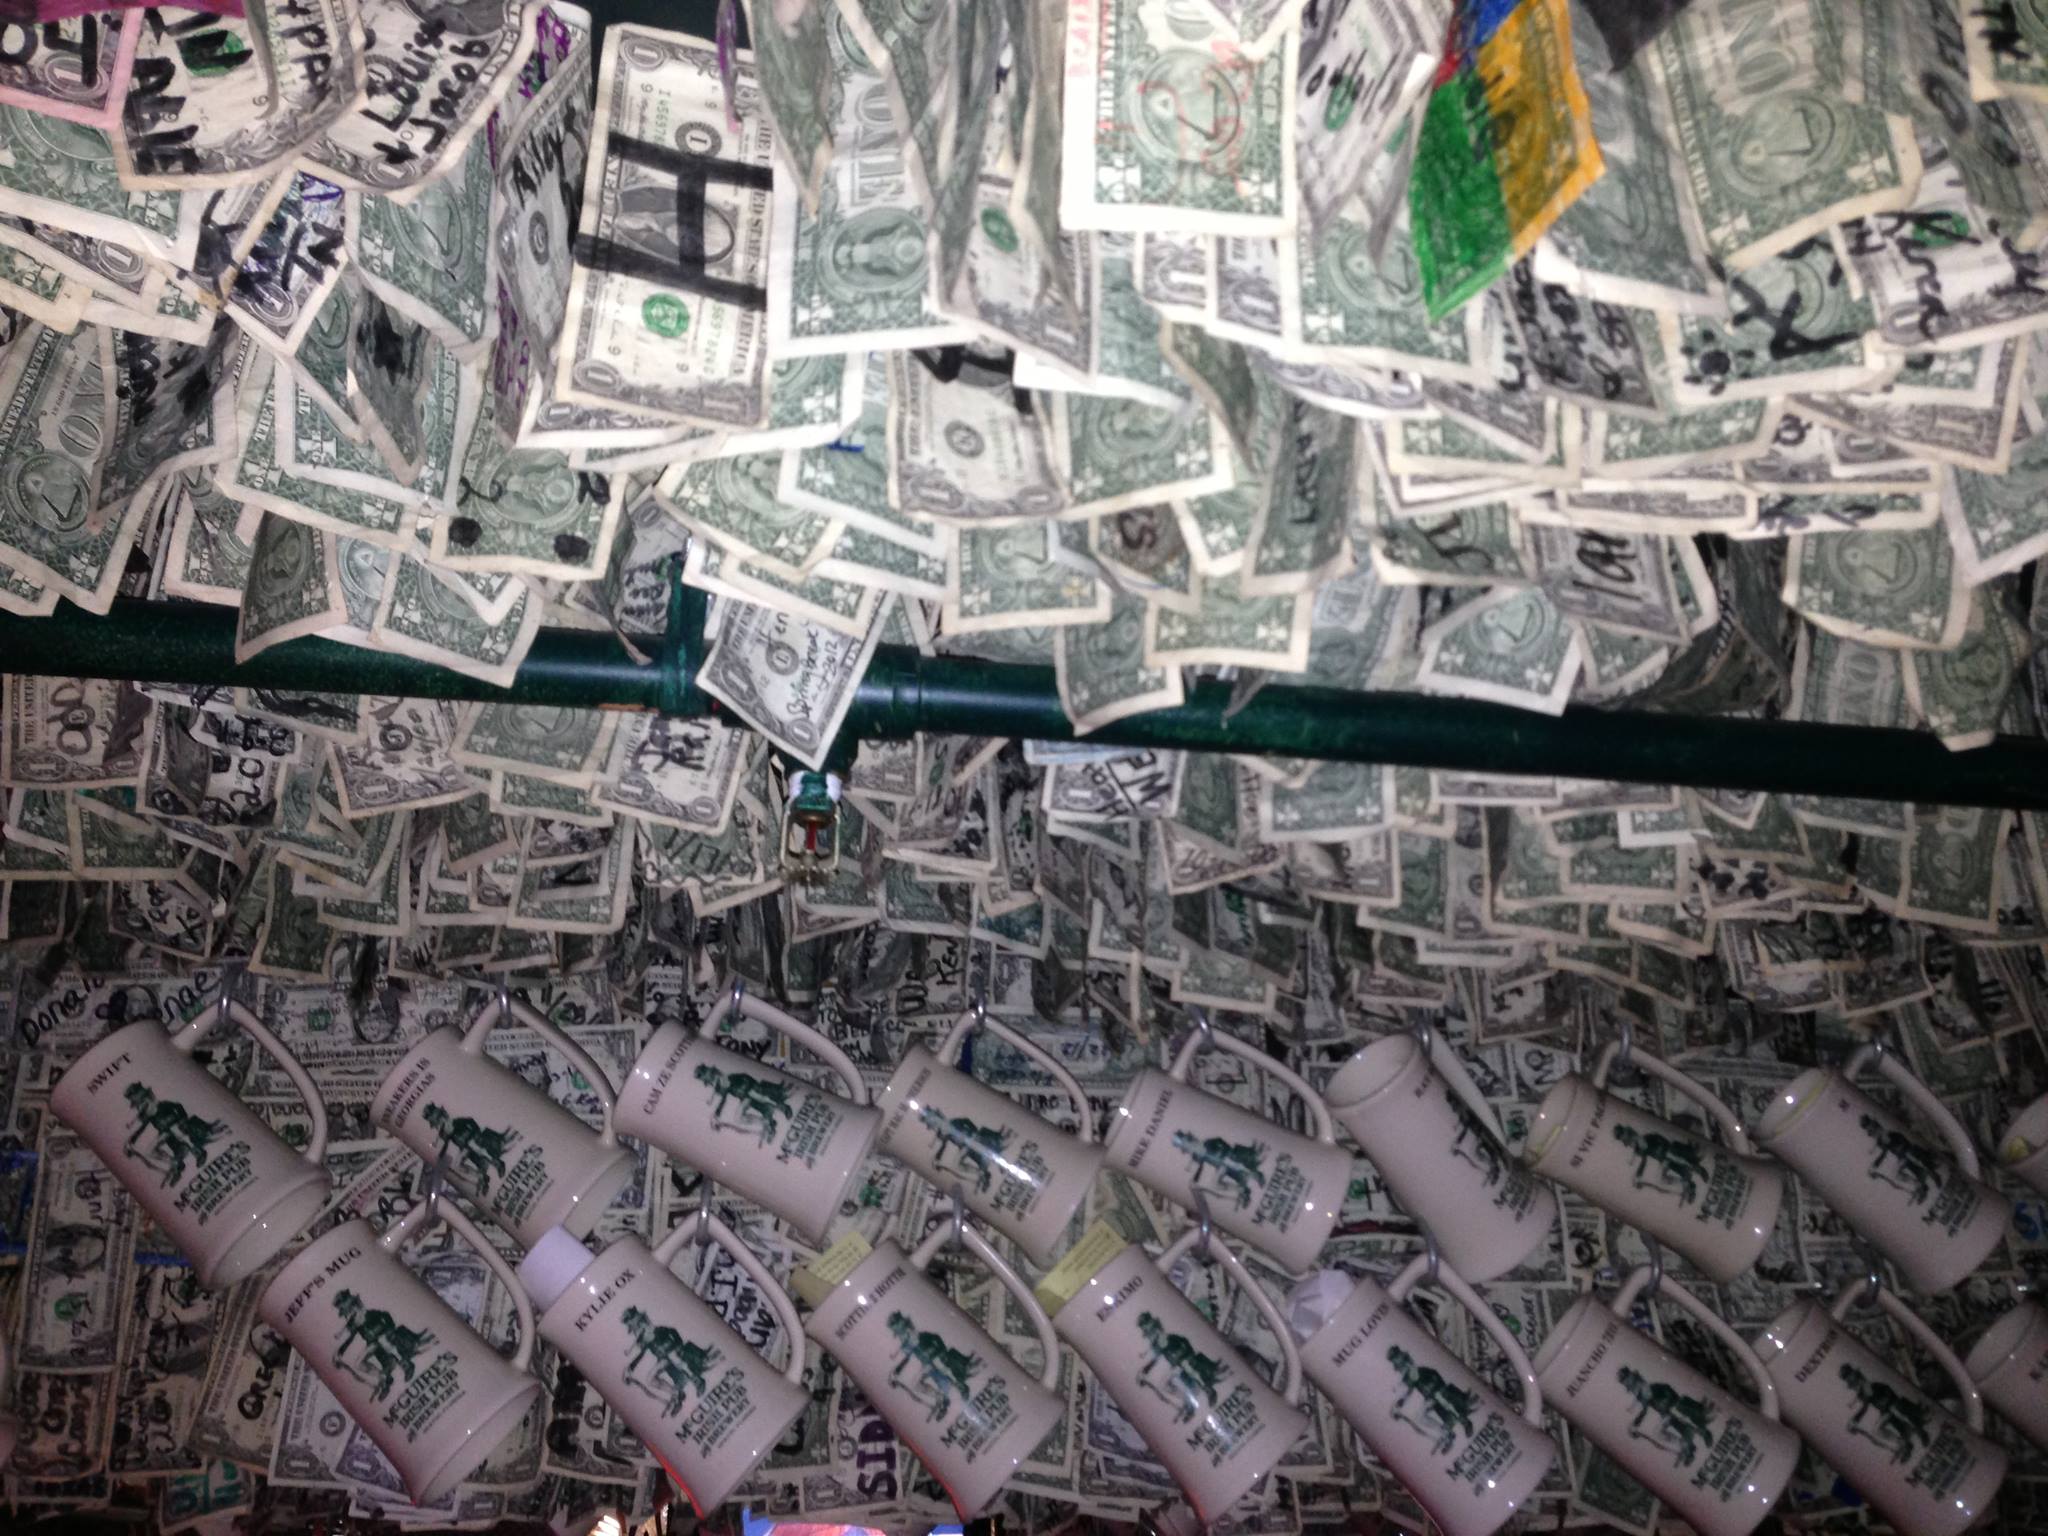 Money and Mugs hanging from the ceiling at McGuires Pensacola